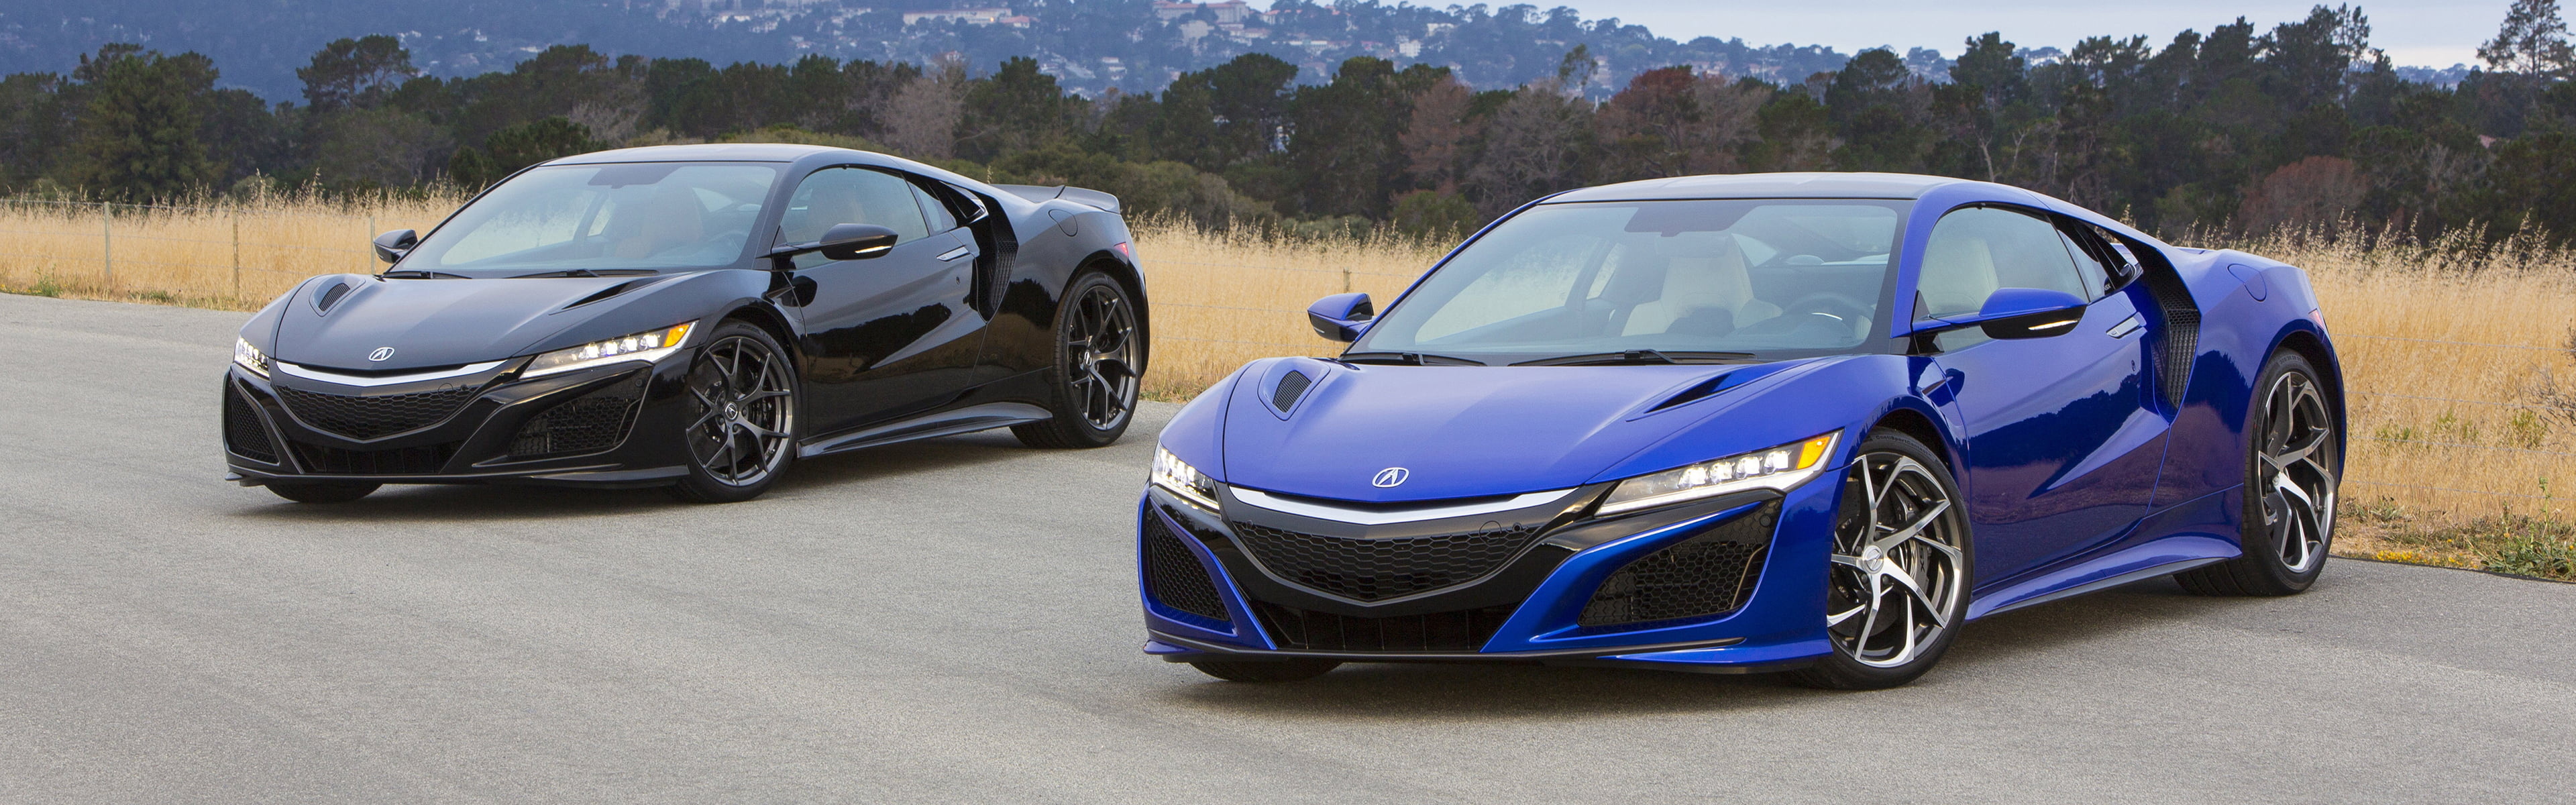 Acura NSX, Dual monitor wallpaper, Black and blue coupes, Stunning performance, 3840x1200 Dual Screen Desktop